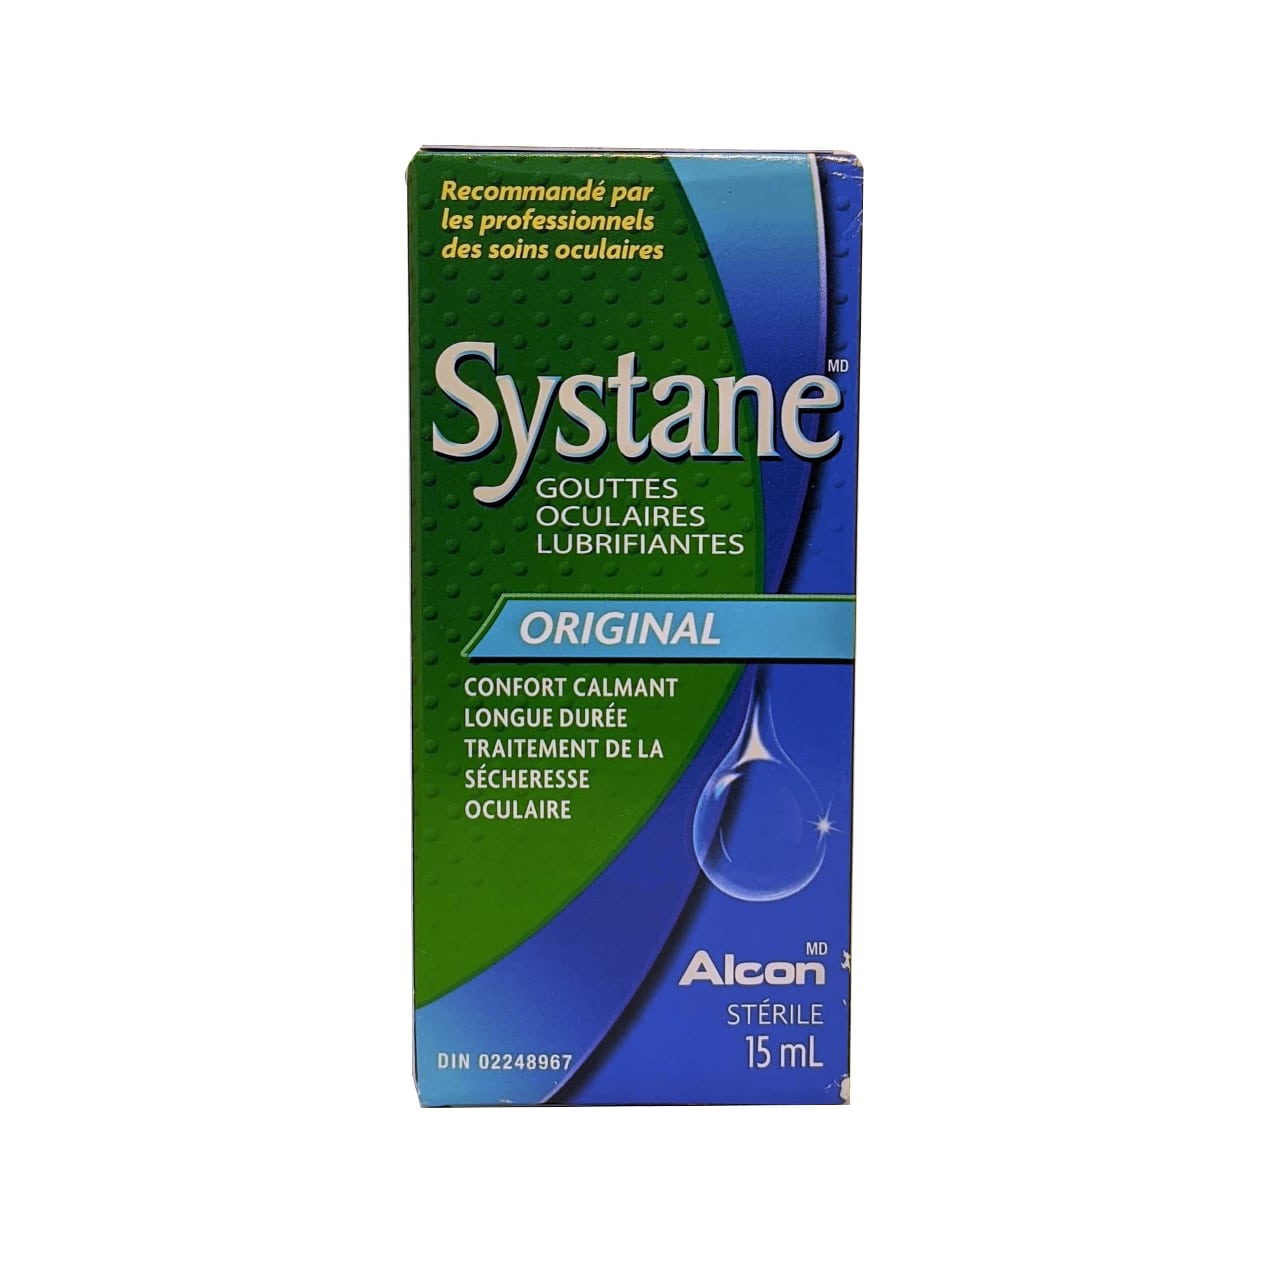 French product label for Alcon Systane Original Lubricant Eye Drops